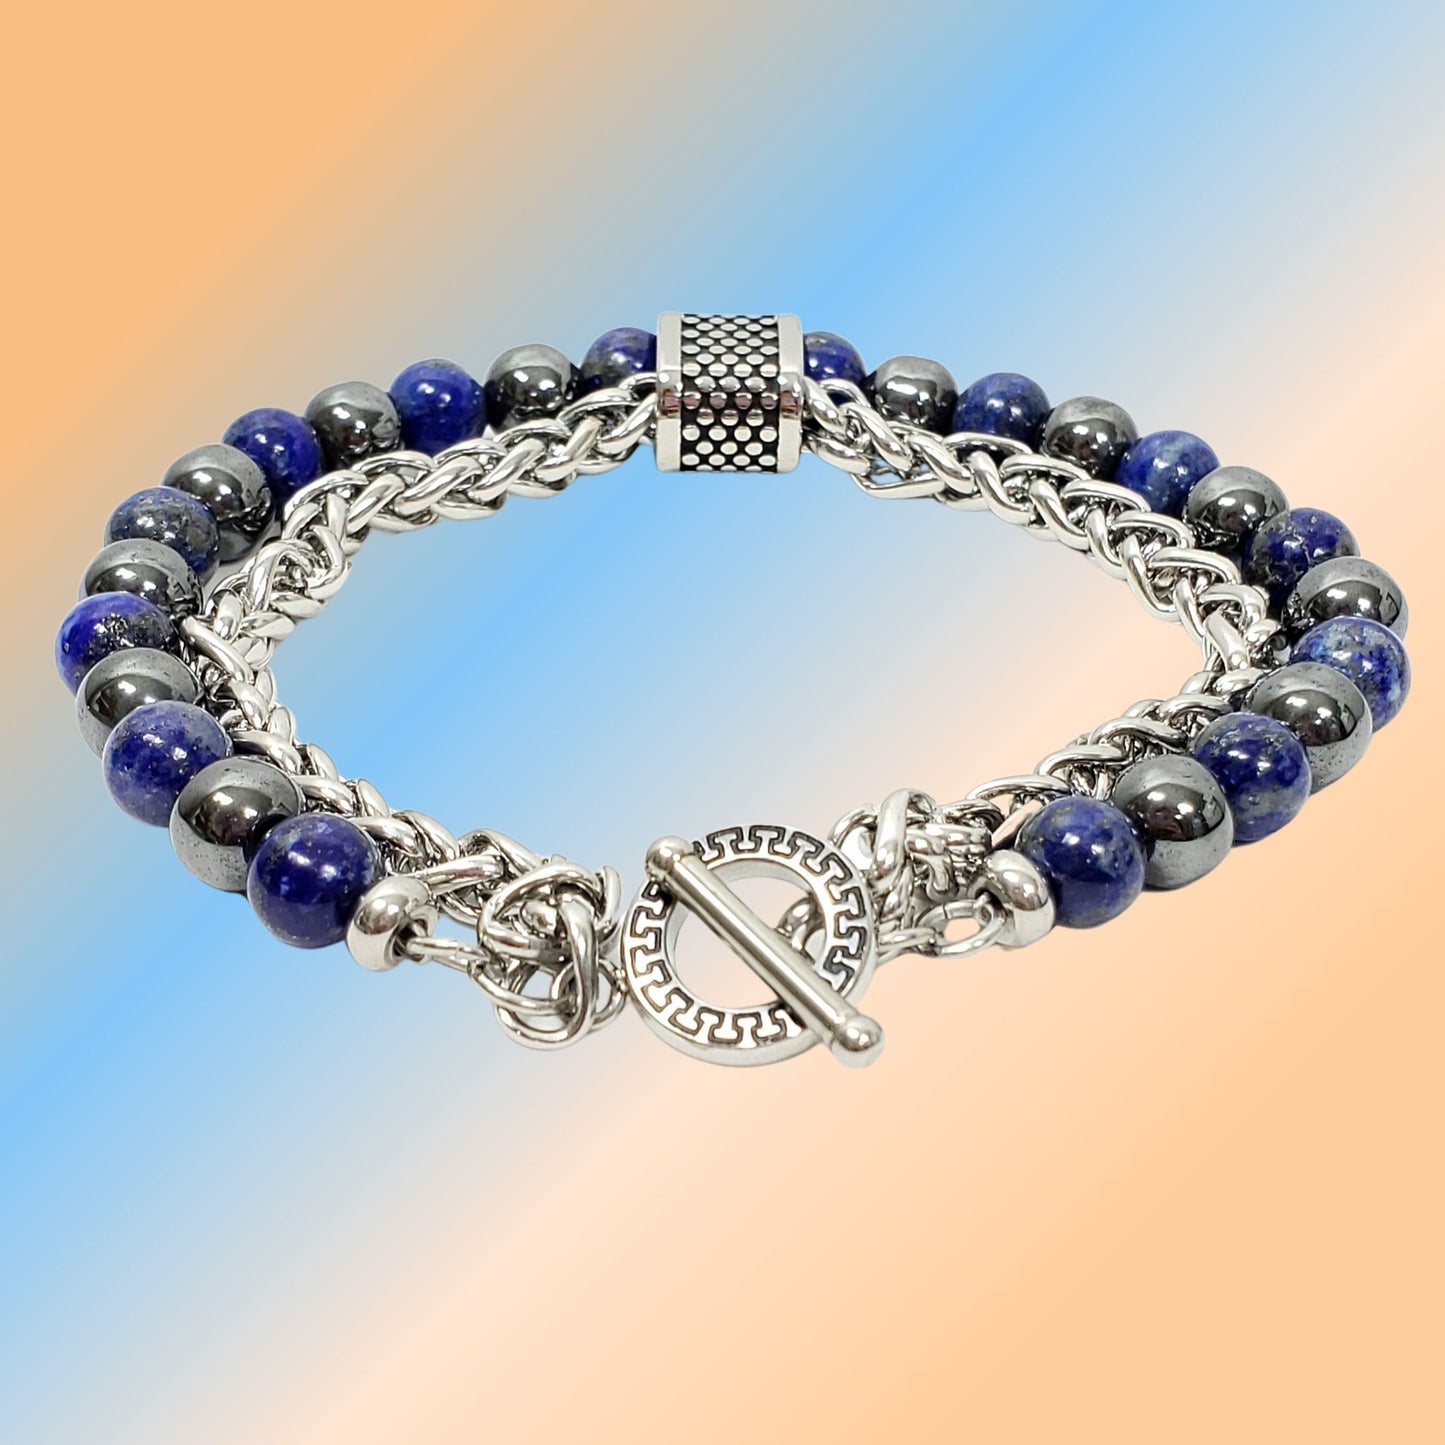 Hematite and Lapis Lazuli Bracelet with Chain and Clasp